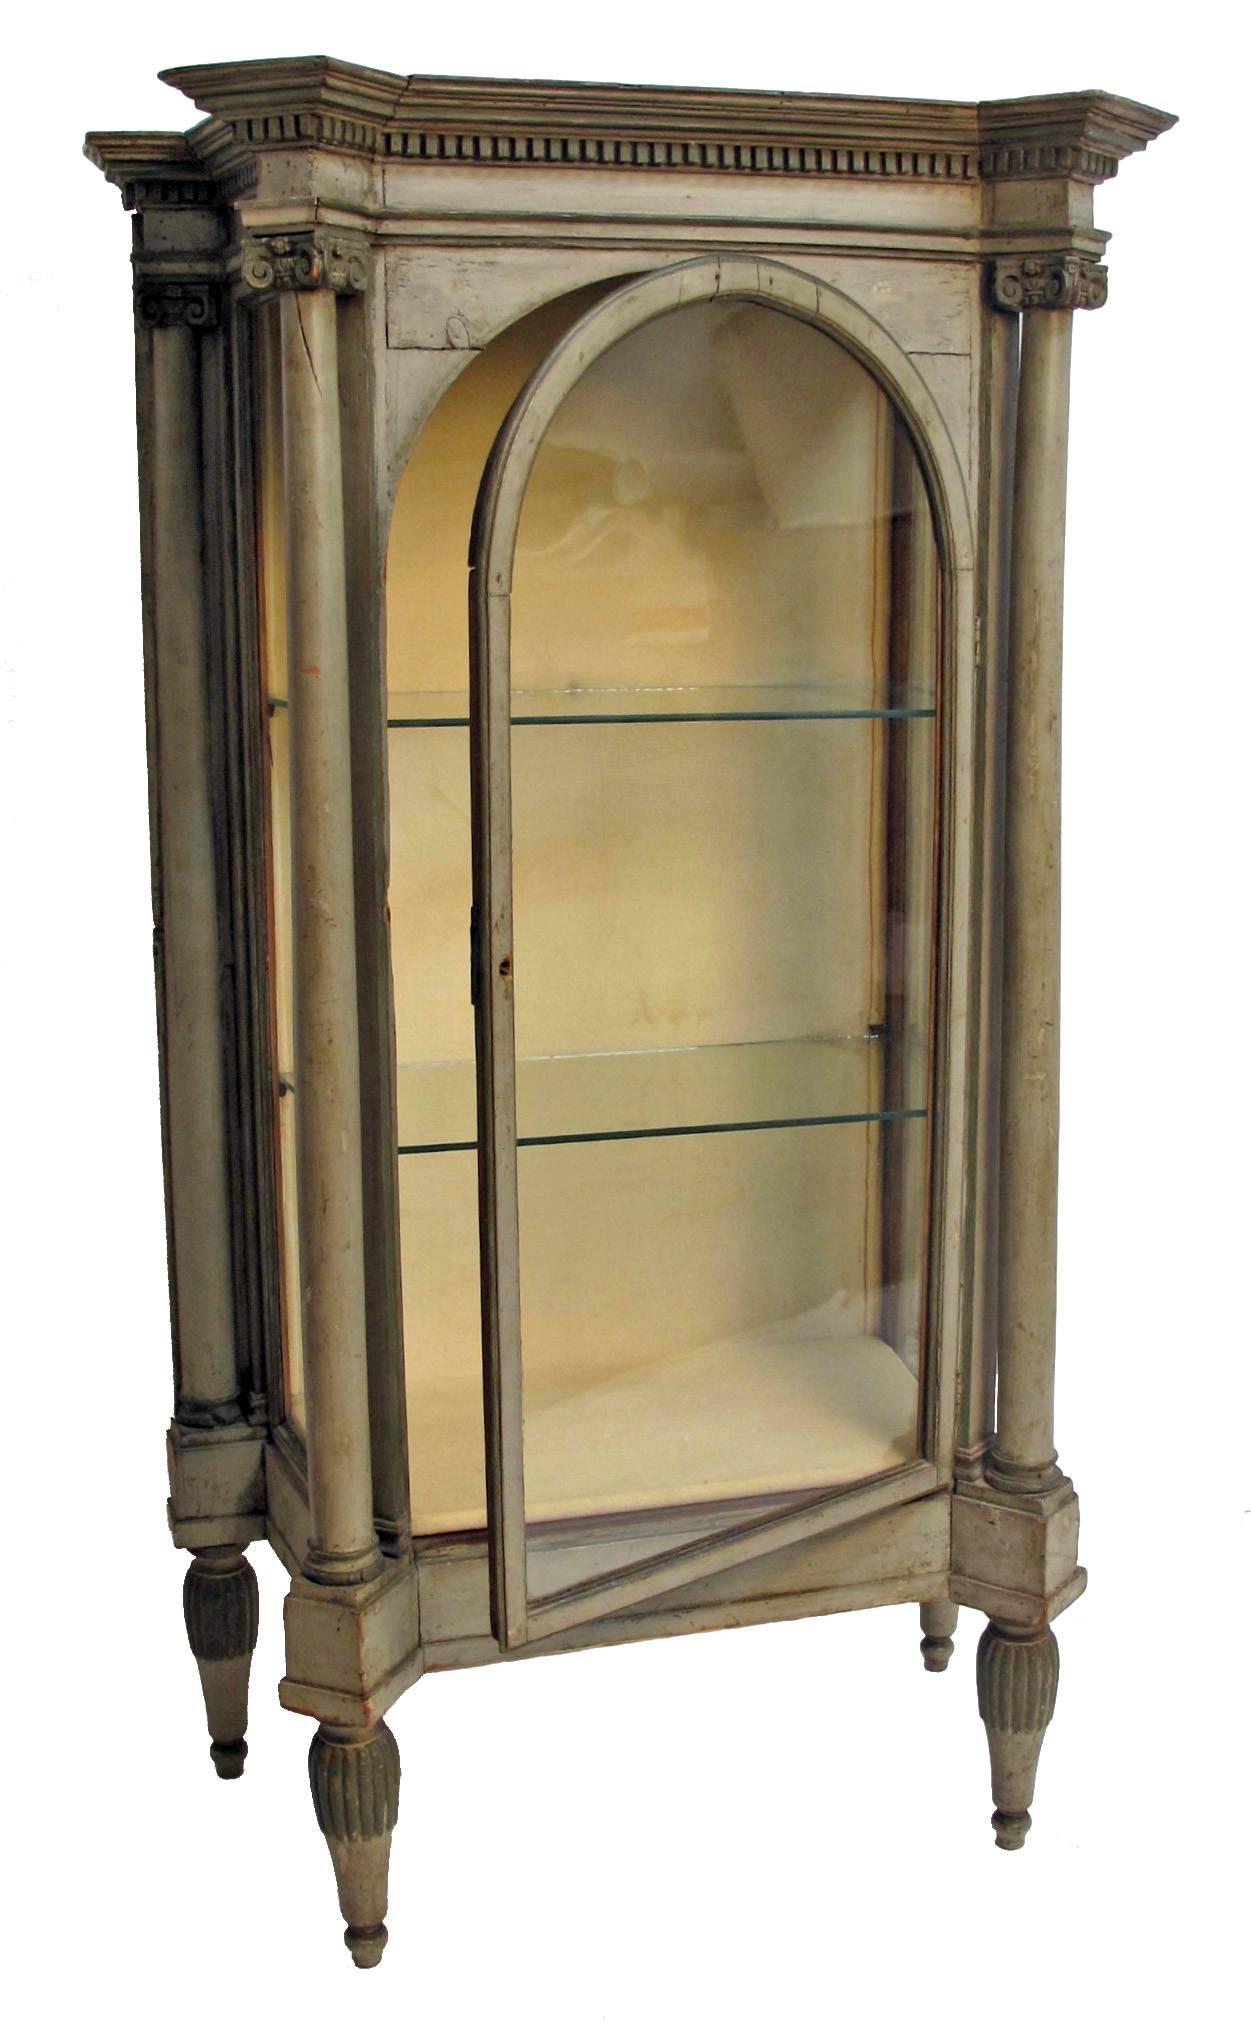 Charming green painted display case or vitrine, neoclassical with carved moulding above pair of corinthian capital columns flanking the arched glass door and pair of pilasters flanking the angled side windows. Standing on tapering cylindrical legs.